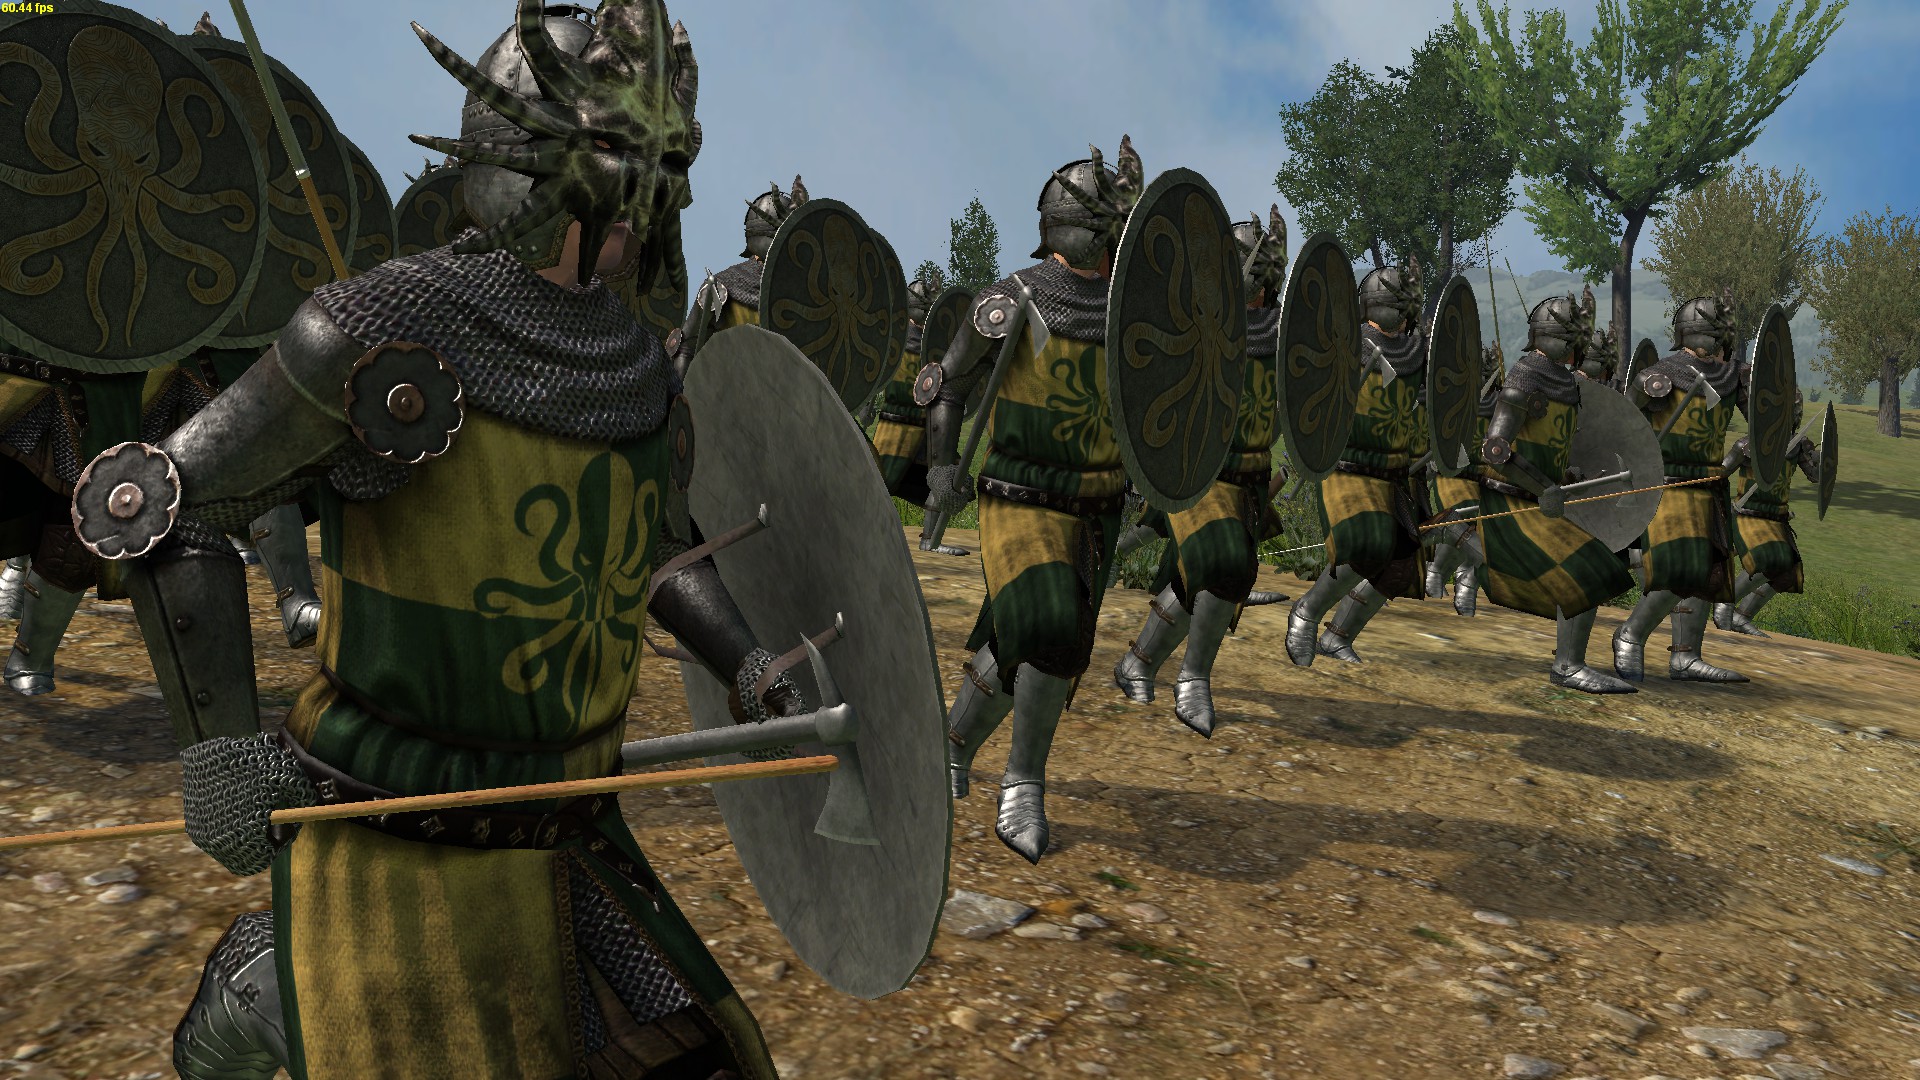 Warband prophesy of pendor 3.9 5. Warband Prophesy of Pendor. Mount and Blade Prophesy of Pendor 3.9.5. Mount & Blade 2 Prophesy of Pendor. Mount & Blade: Warband.